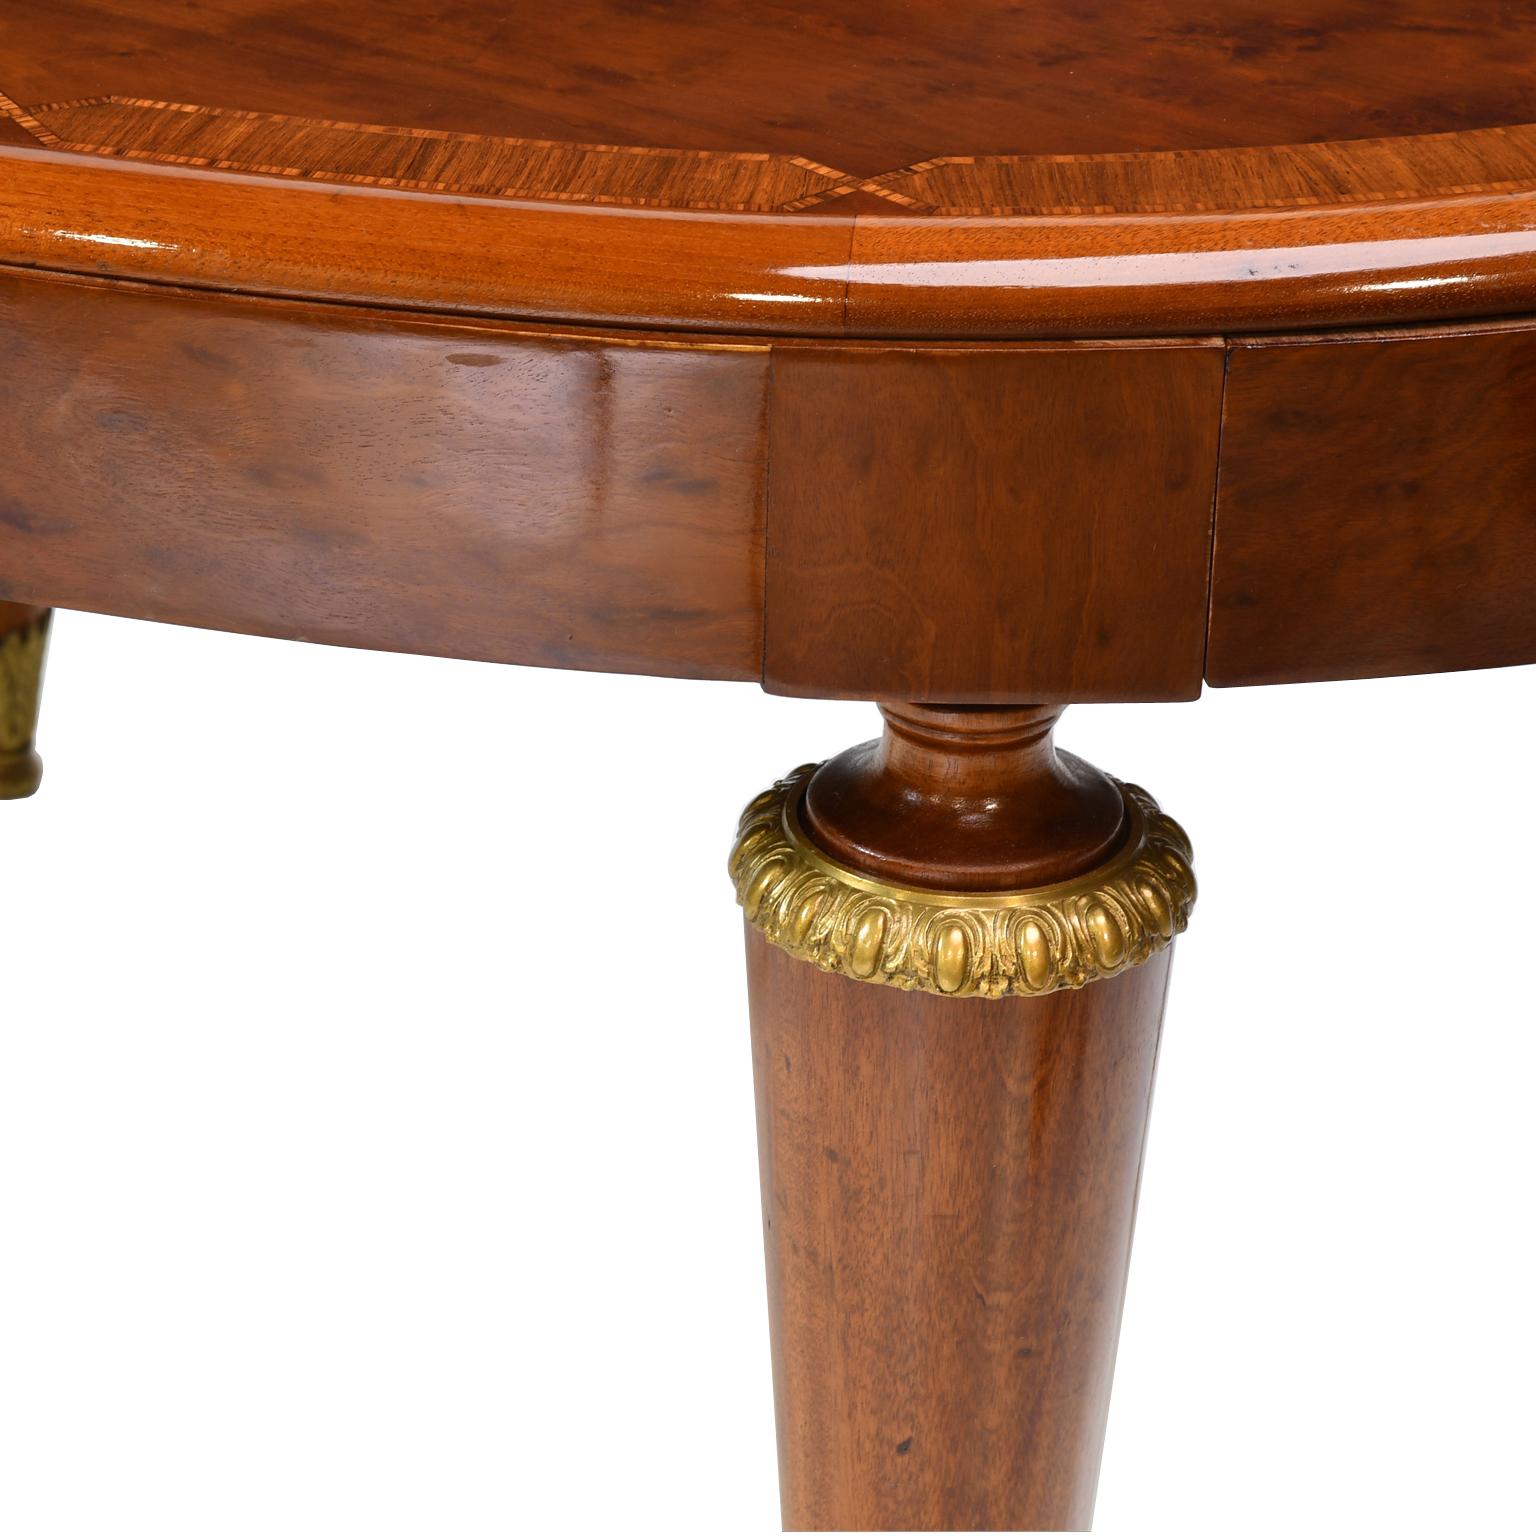 A sleek and stylish French Art Deco dining table in polished quilted plum mahogany with inlays of kingwood and satinwood along the banded edge. This fine table has an oval top with an apron over a base with four inverted conical legs with bronze